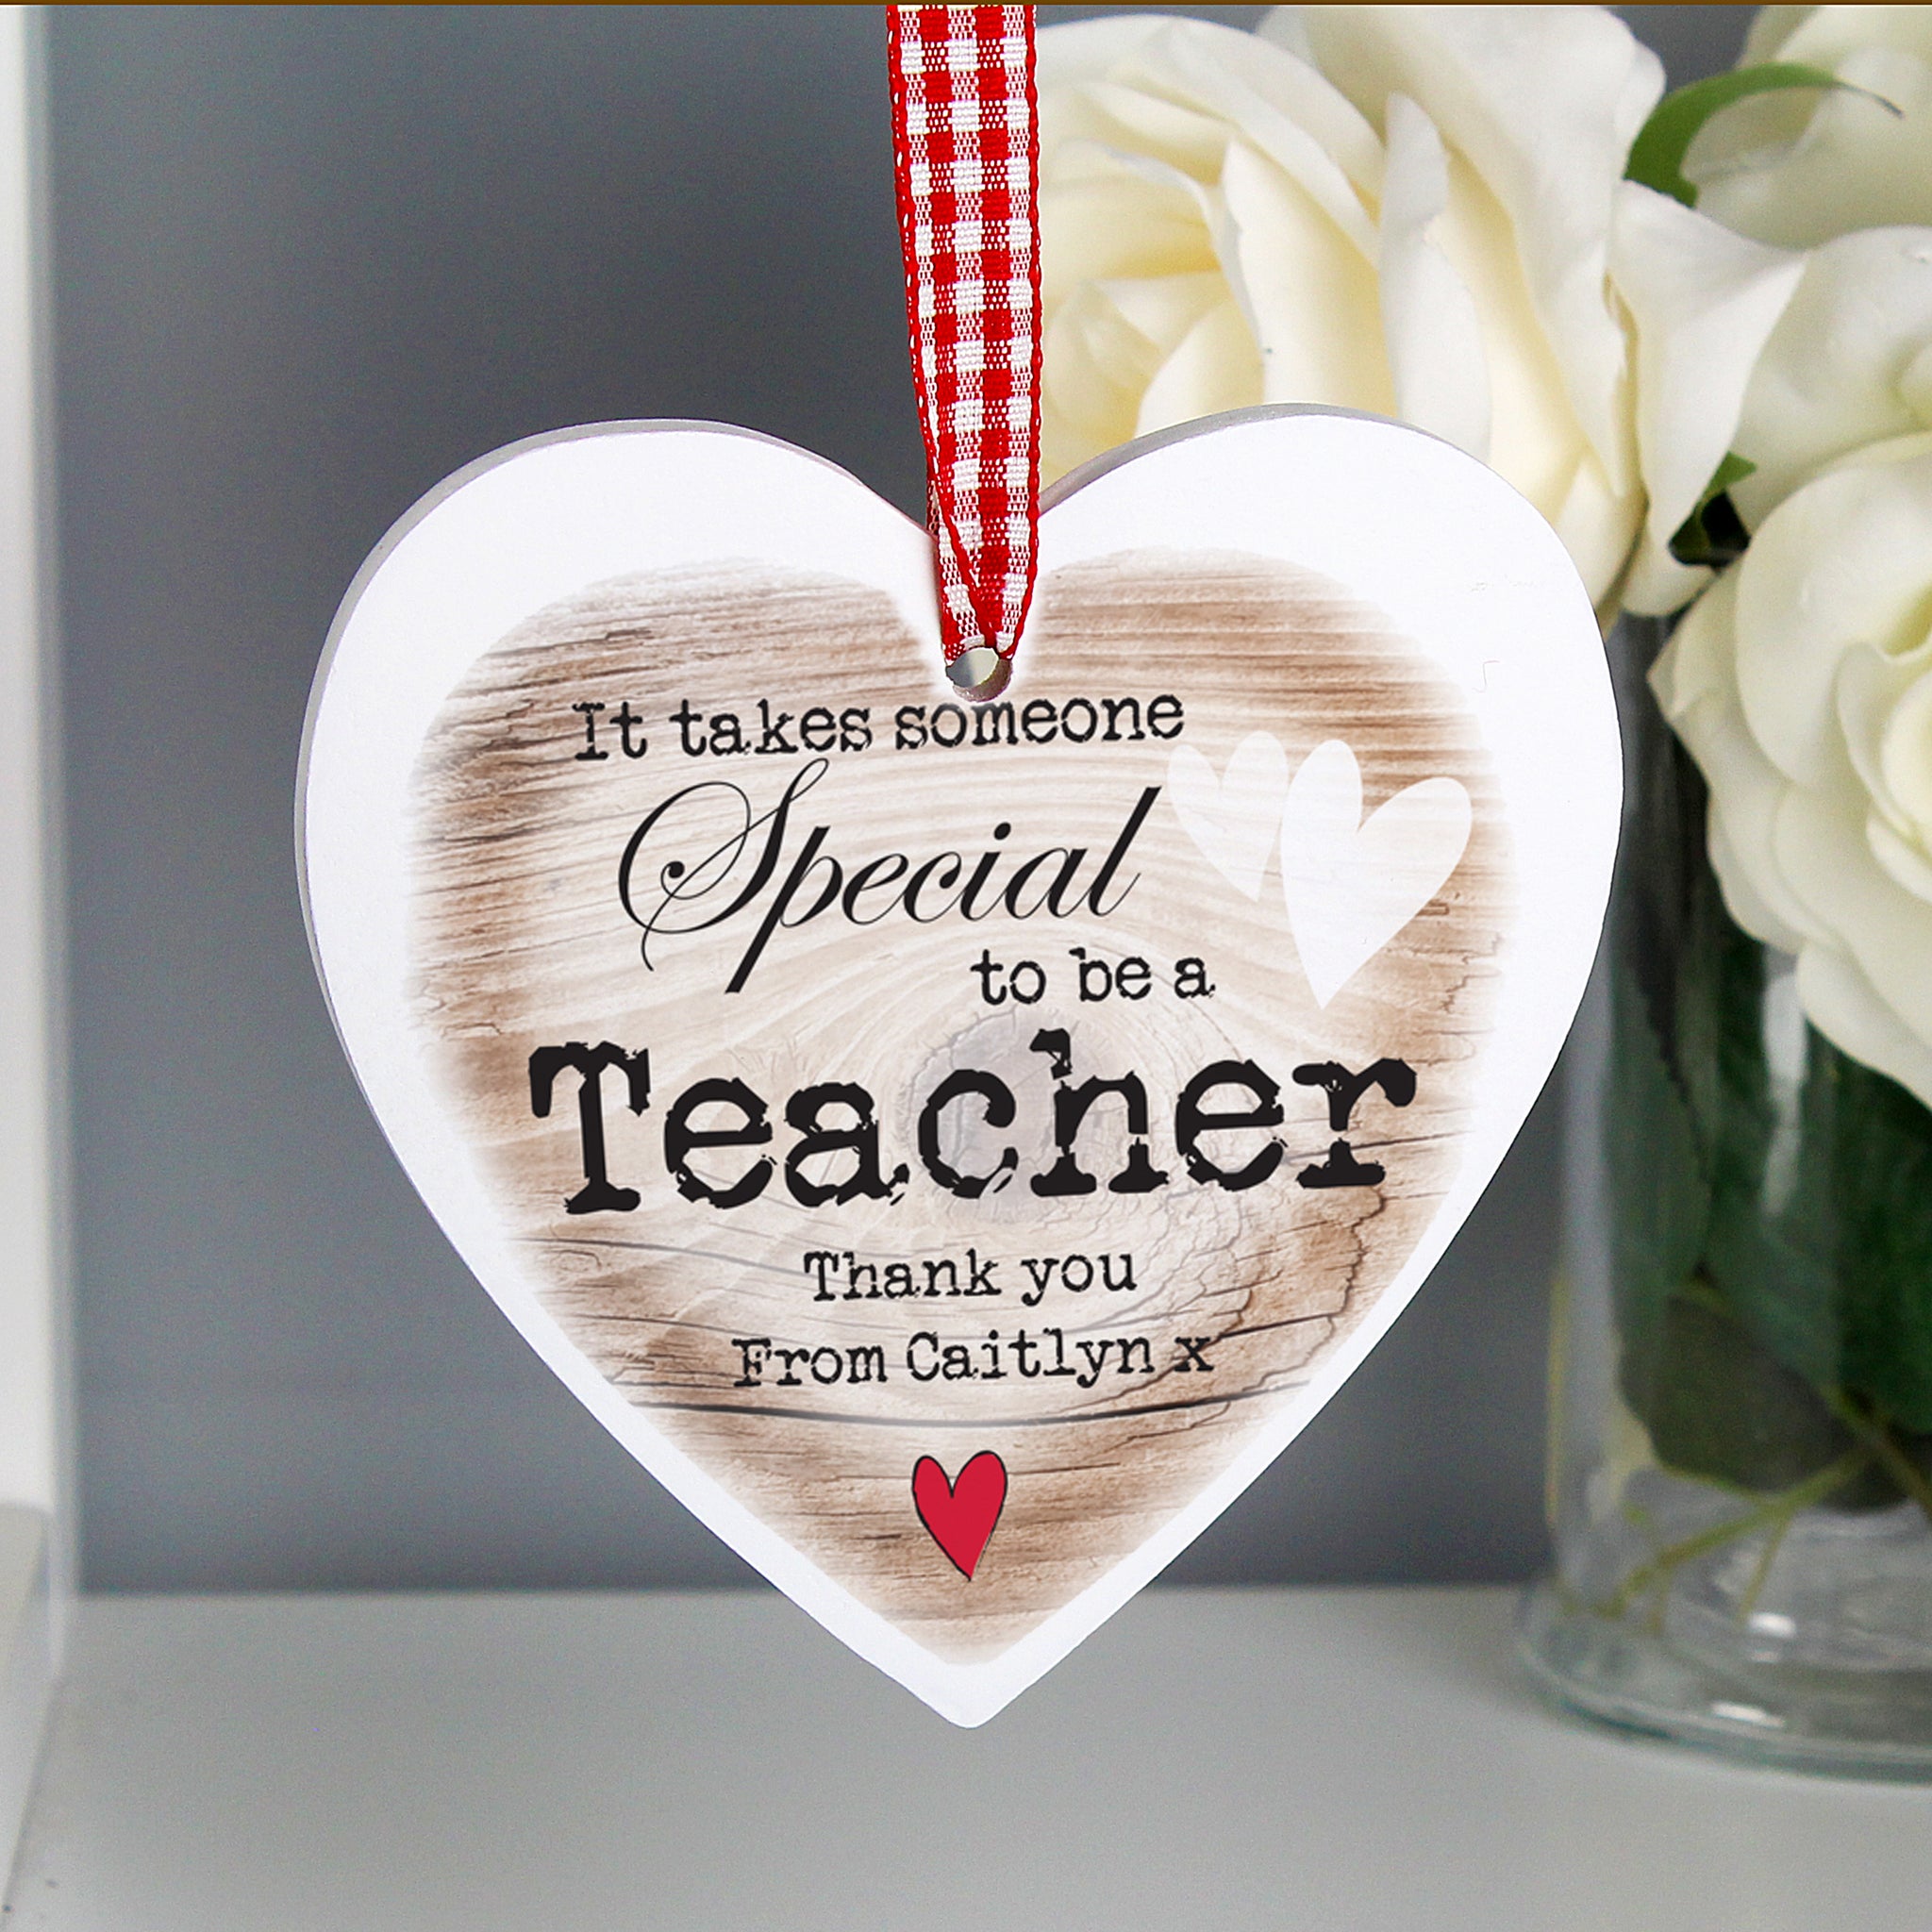 Beautiful wooden heart hanging sign 'Someone Special' would make a lovely gift.  Personalise this decoration with a role or name up to 12 characters and a message up to two lines of up to 15 characters on each line. The words 'It takes someone special to be a' are fixed text.